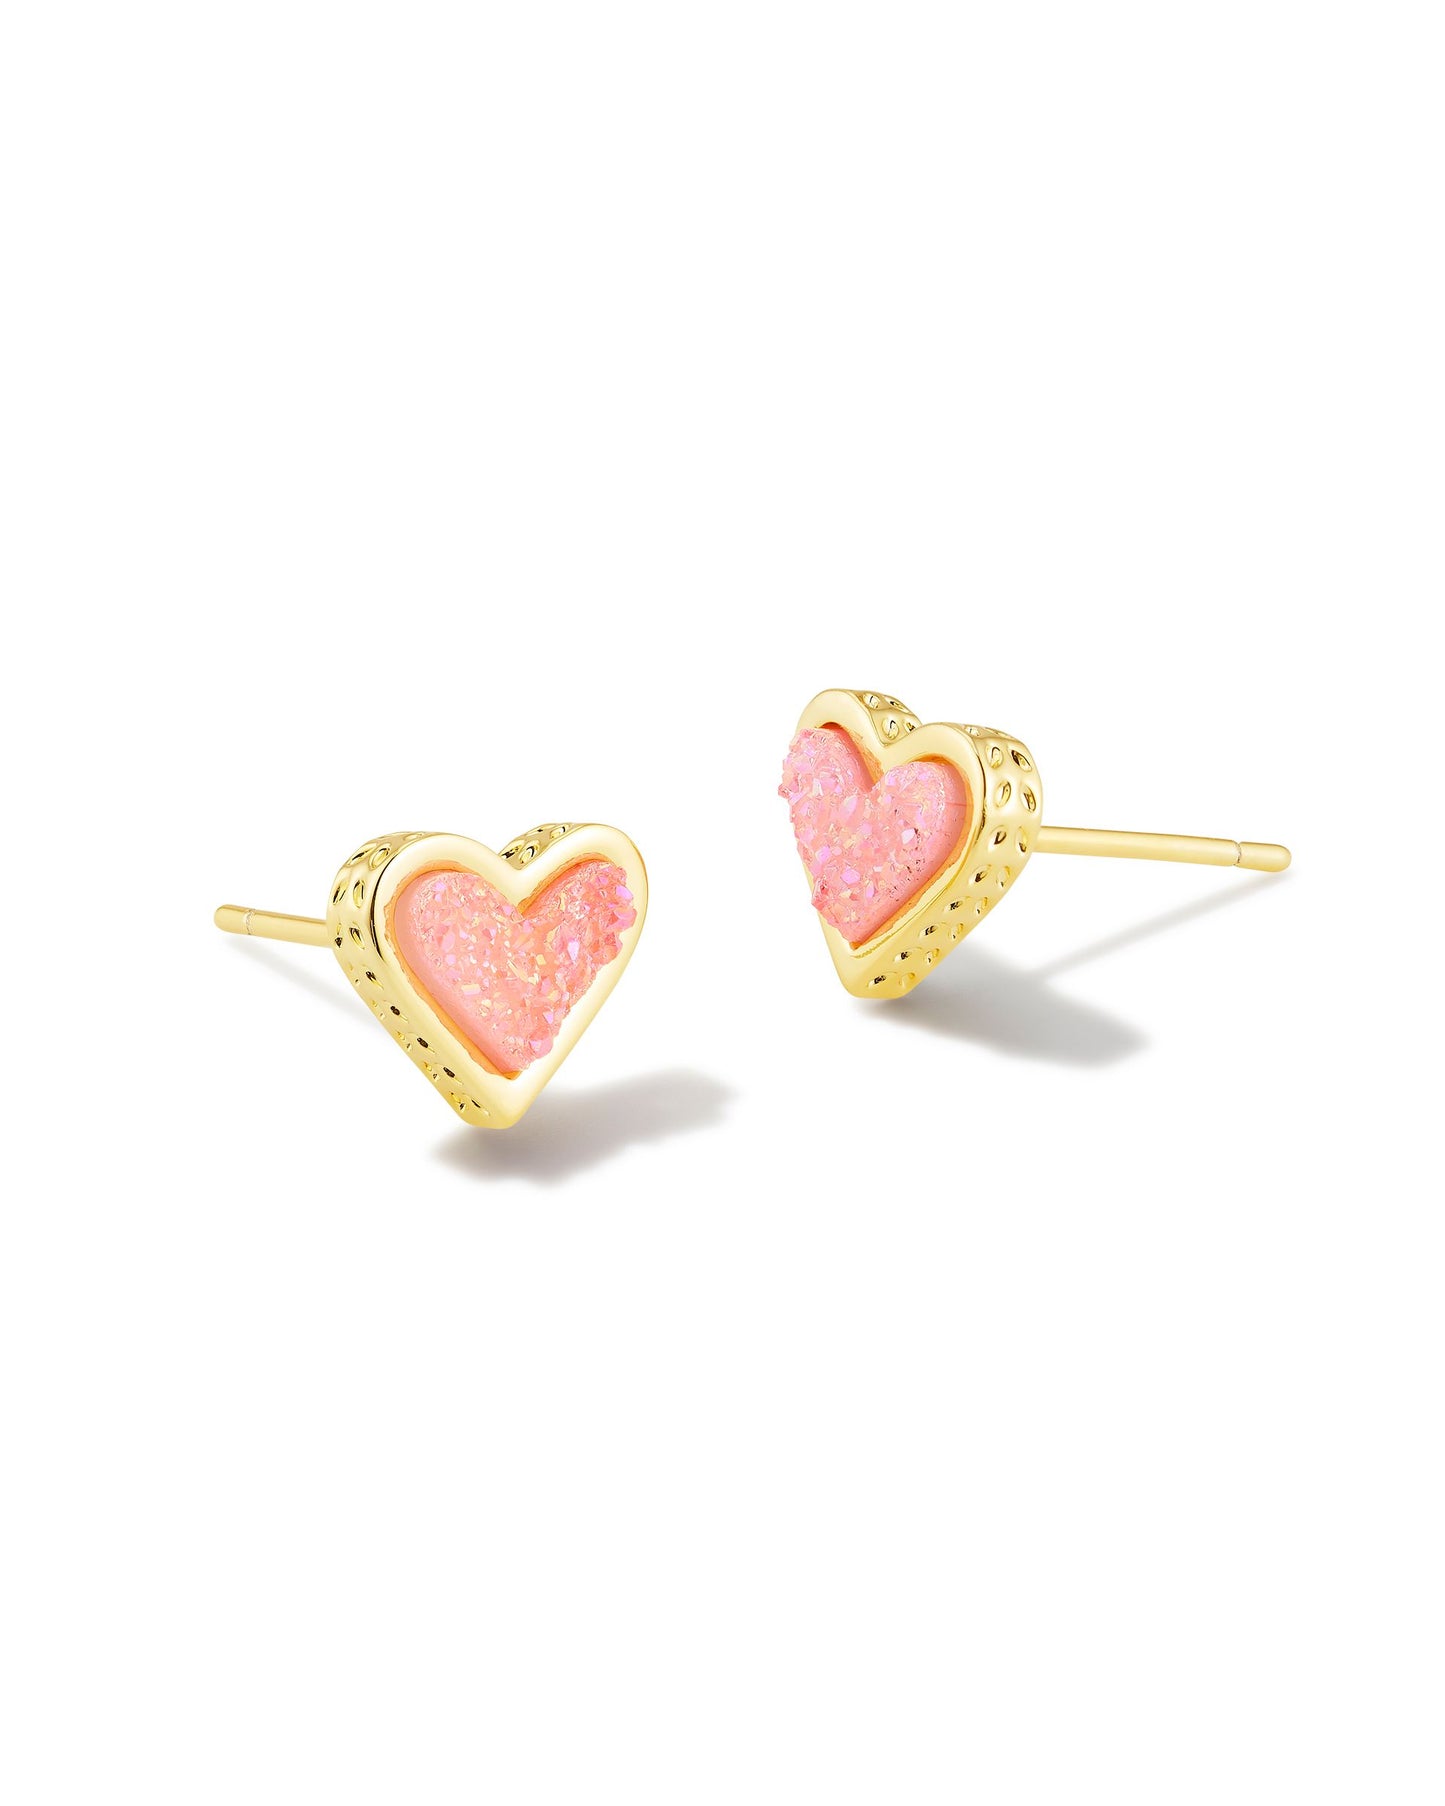 It’s only a matter of time before you fall for the Framed Ari Heart Gold Studs. A slightly updated version of our fan-favorite silhouette, these studs feature a smaller heart shape and a sleek metal frame embellished with our signature hoofprint detailing. Fun, flirty, and feminine, these sweet heart earrings are always a good idea. Gold Light Pink Drusy